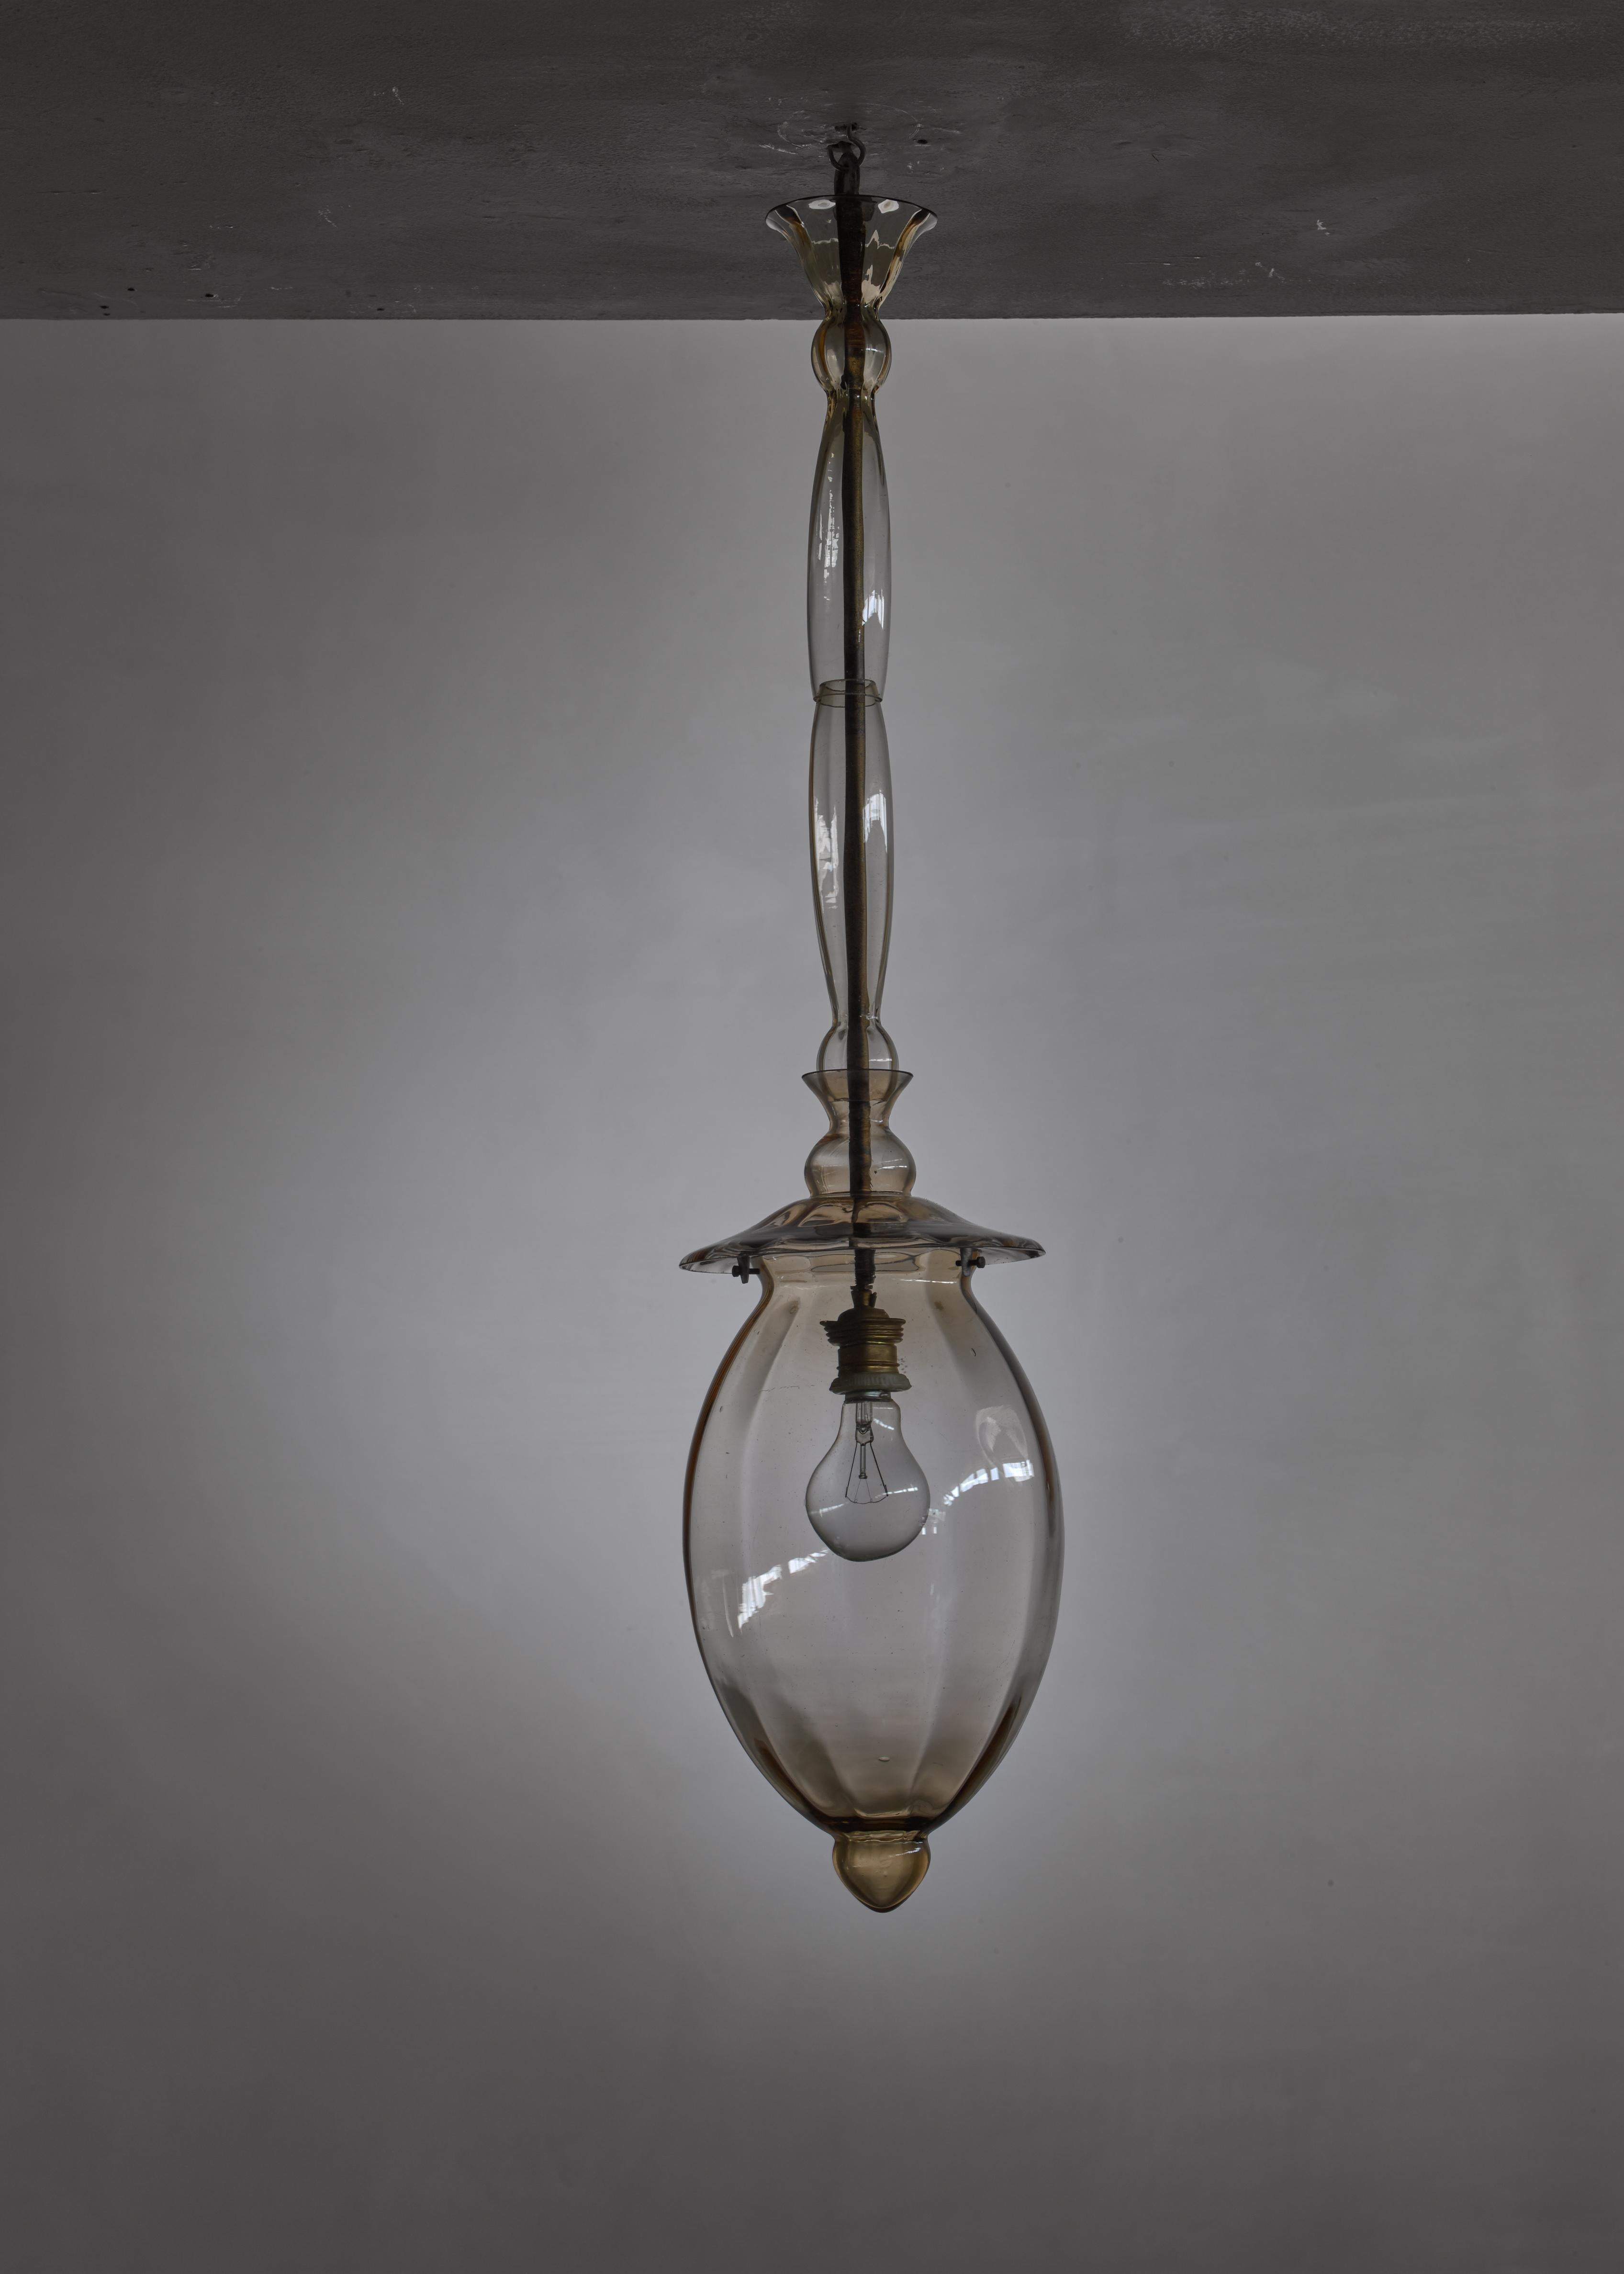 A taupe Murano glass 'Doge' type pendant lamp from Italy. The lamp is made of four glass elements in transparent amber around a brass stem.

Marked with the etched Murano coat of arms.